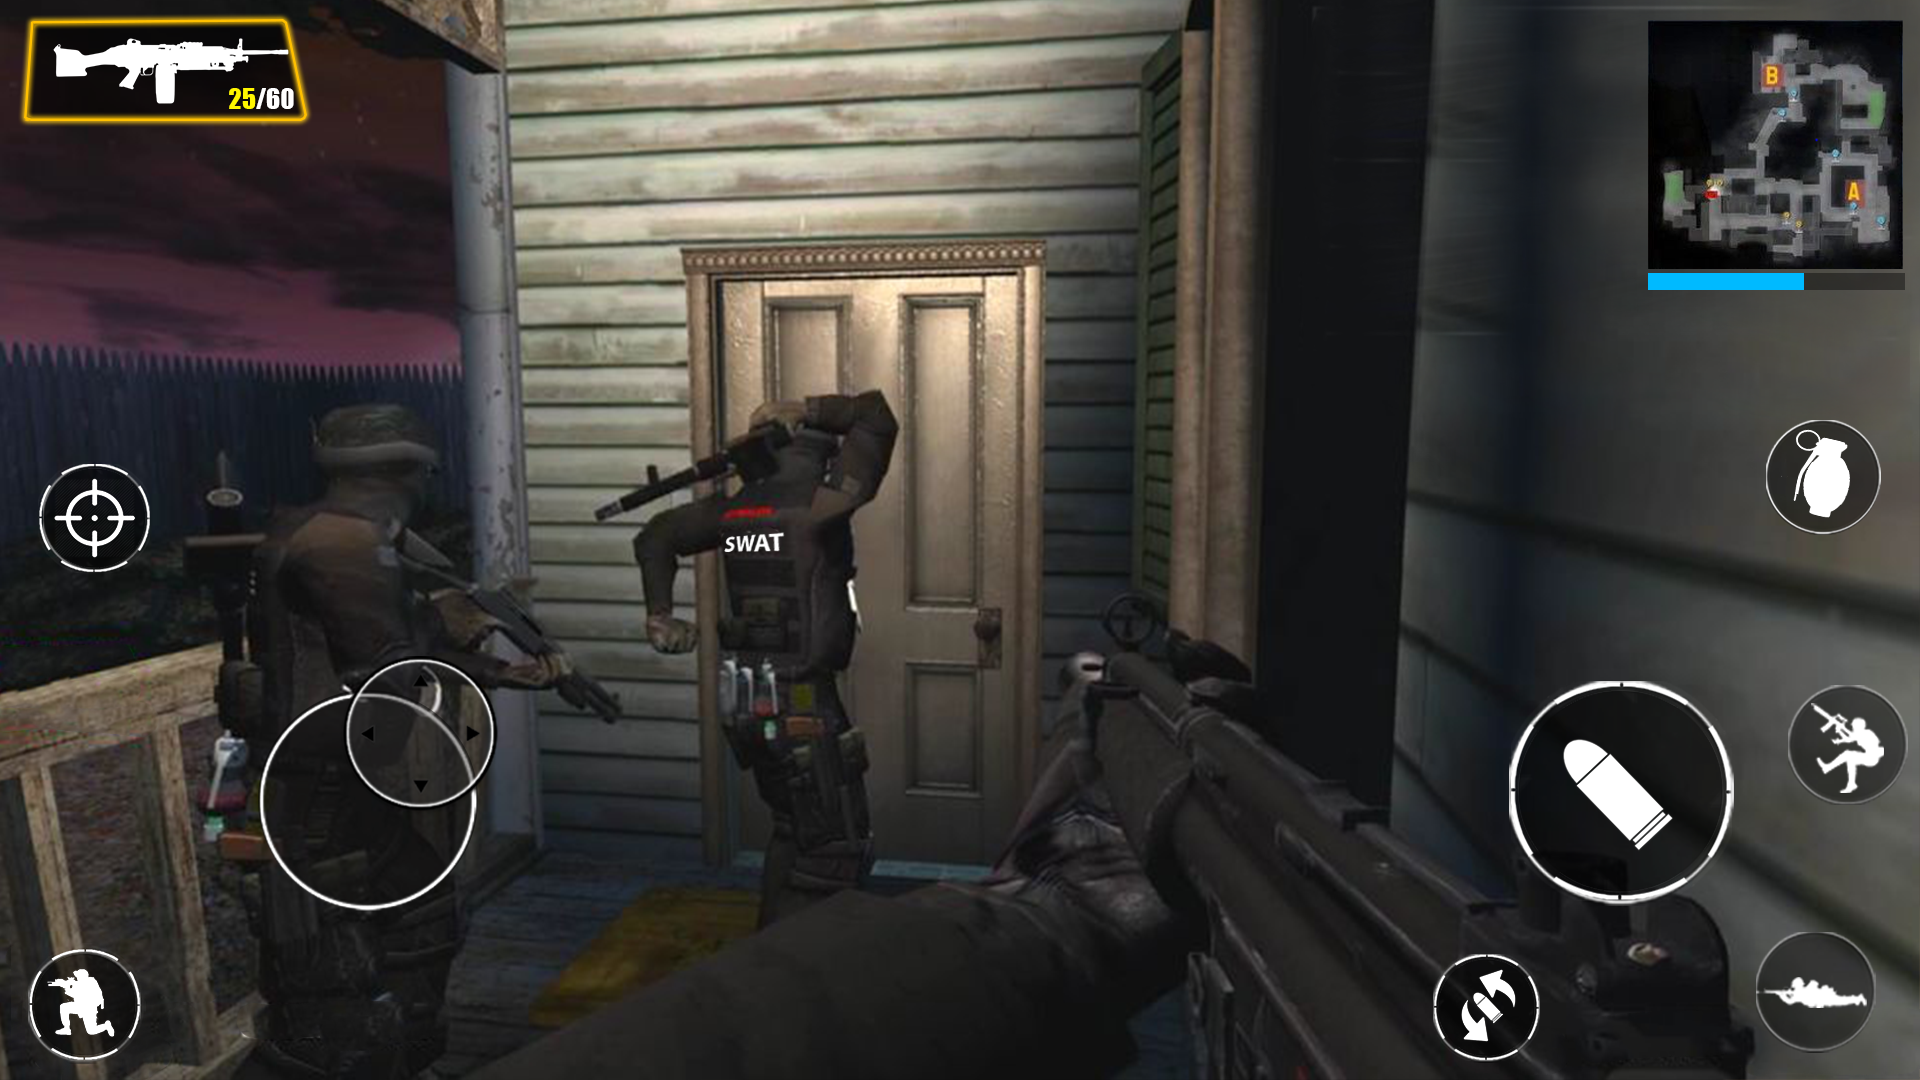 Swat Games Gun Shooting Games Game for Android